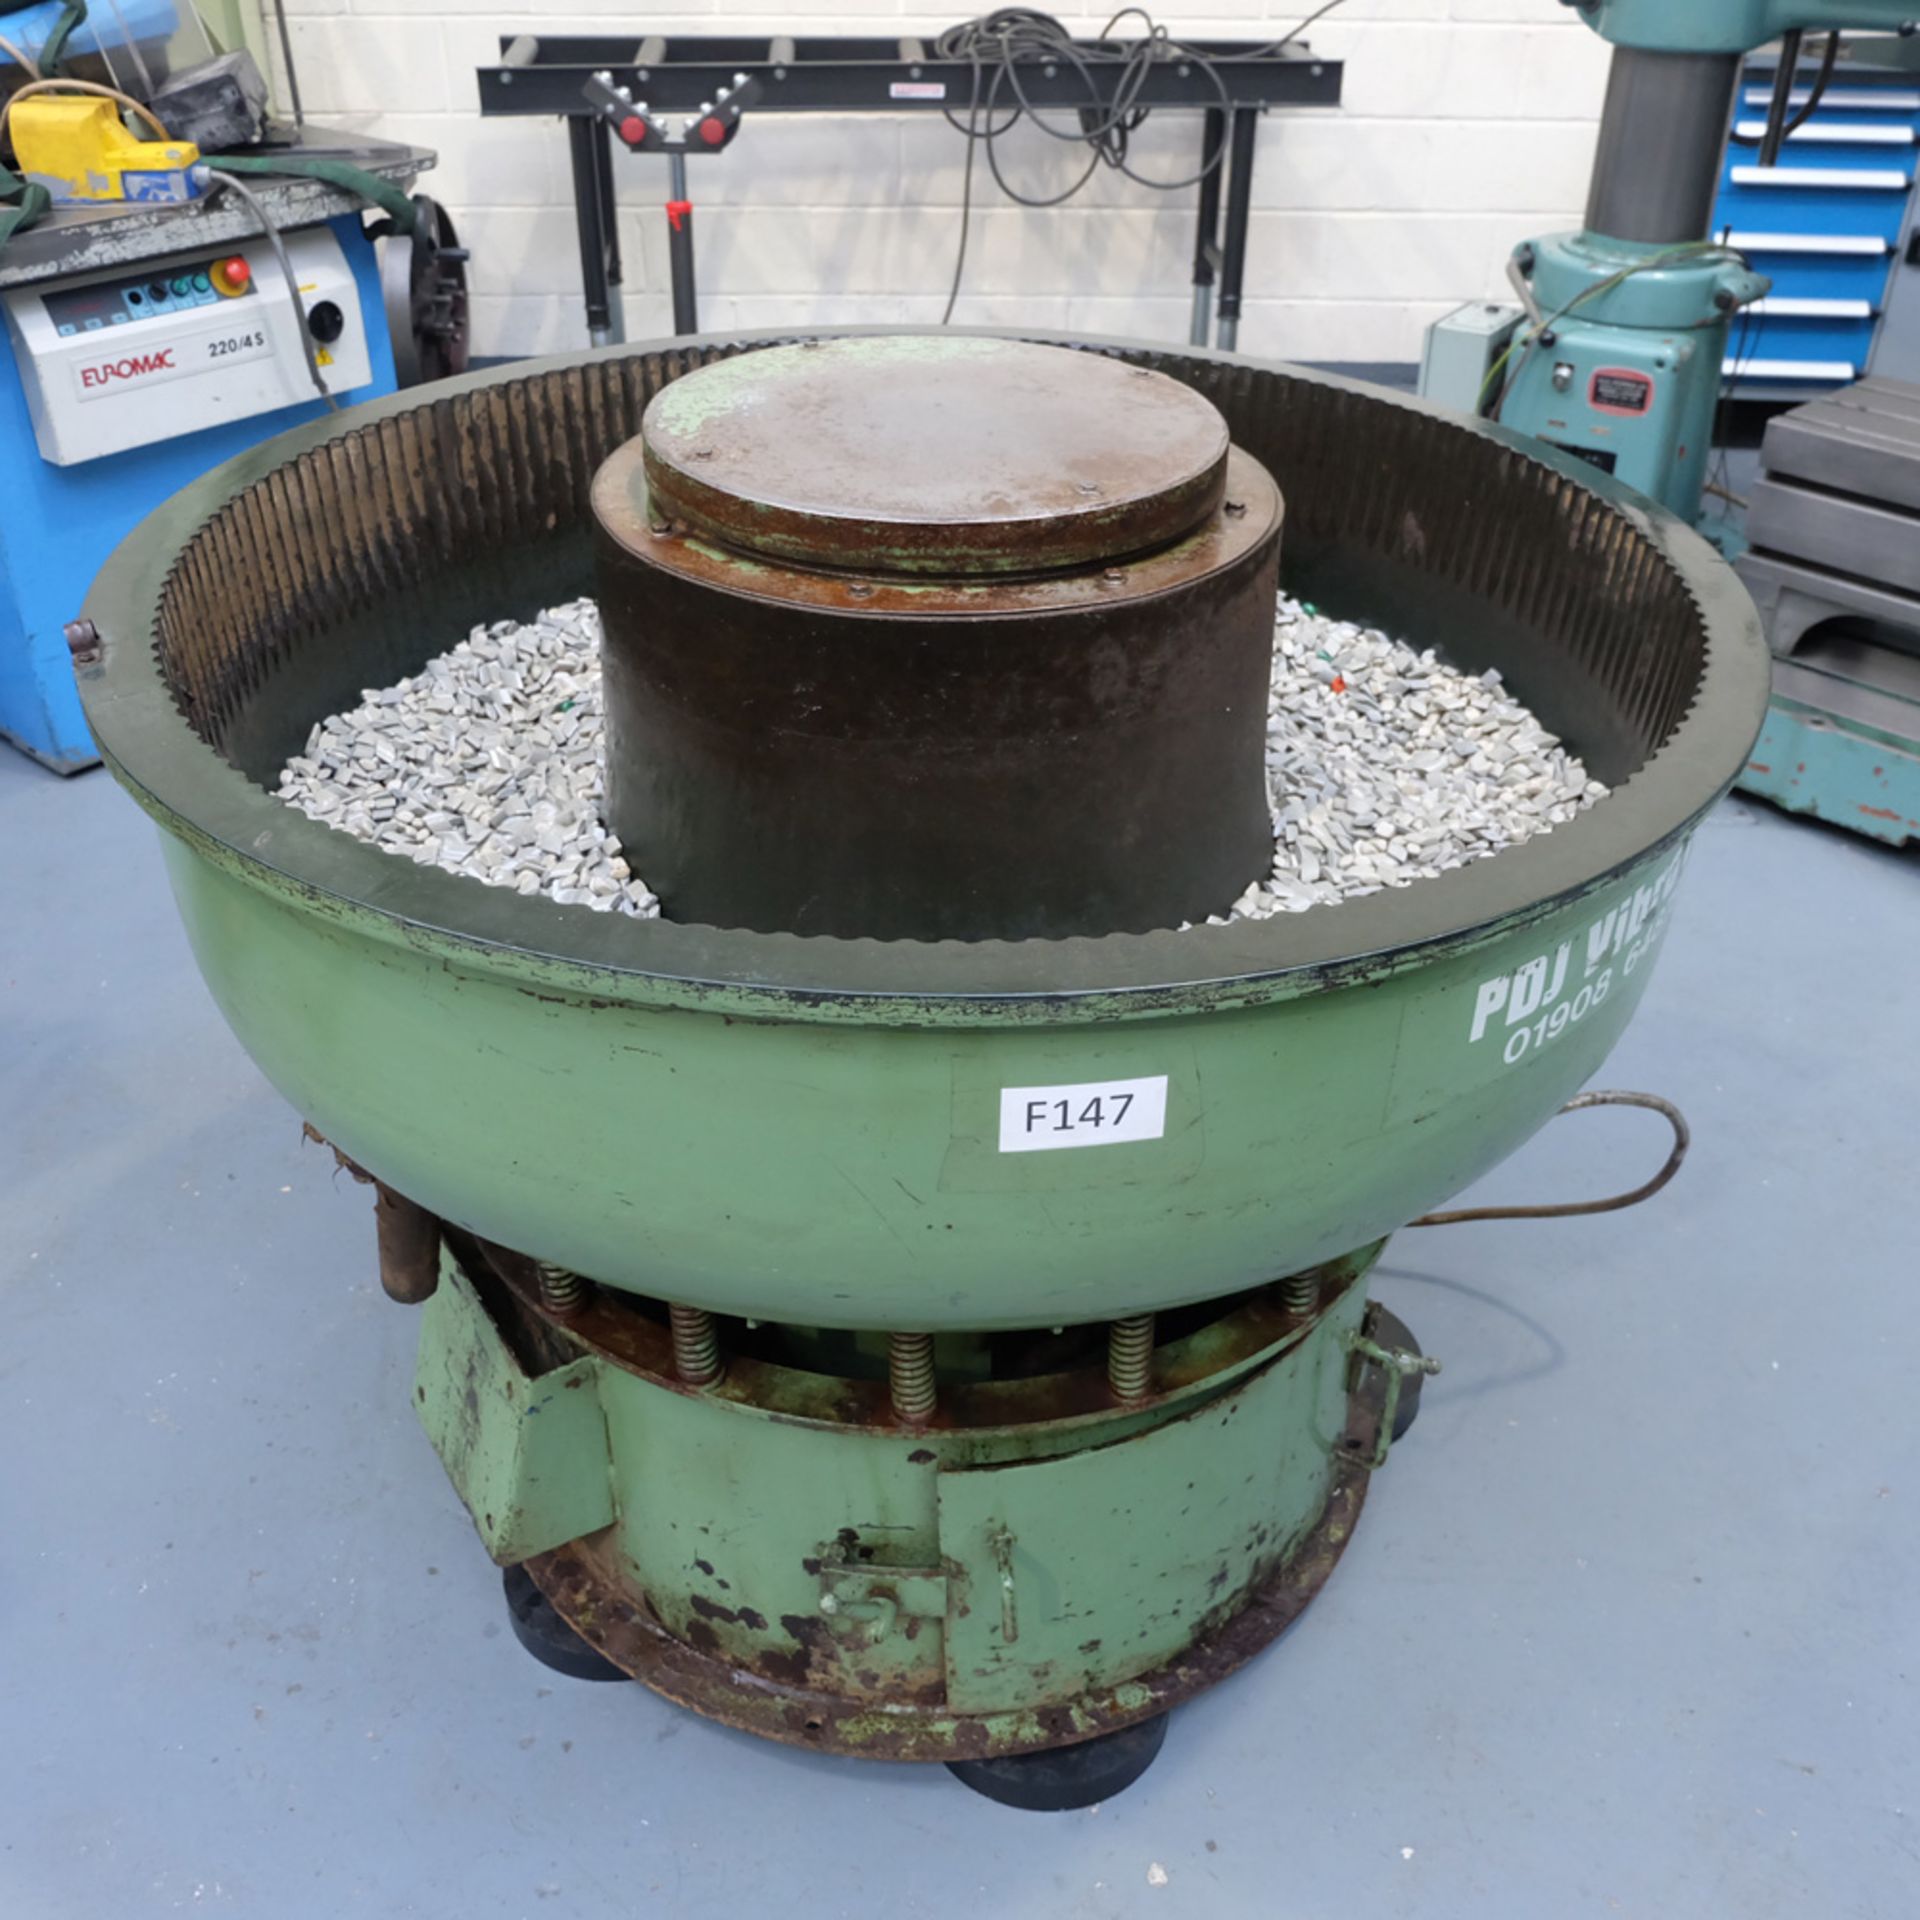 PDJ Circular Vibratory Bowl Finisher. Size 1300mm Diameter. Through Size 300mm. Bowl Height 950mm. - Image 2 of 5